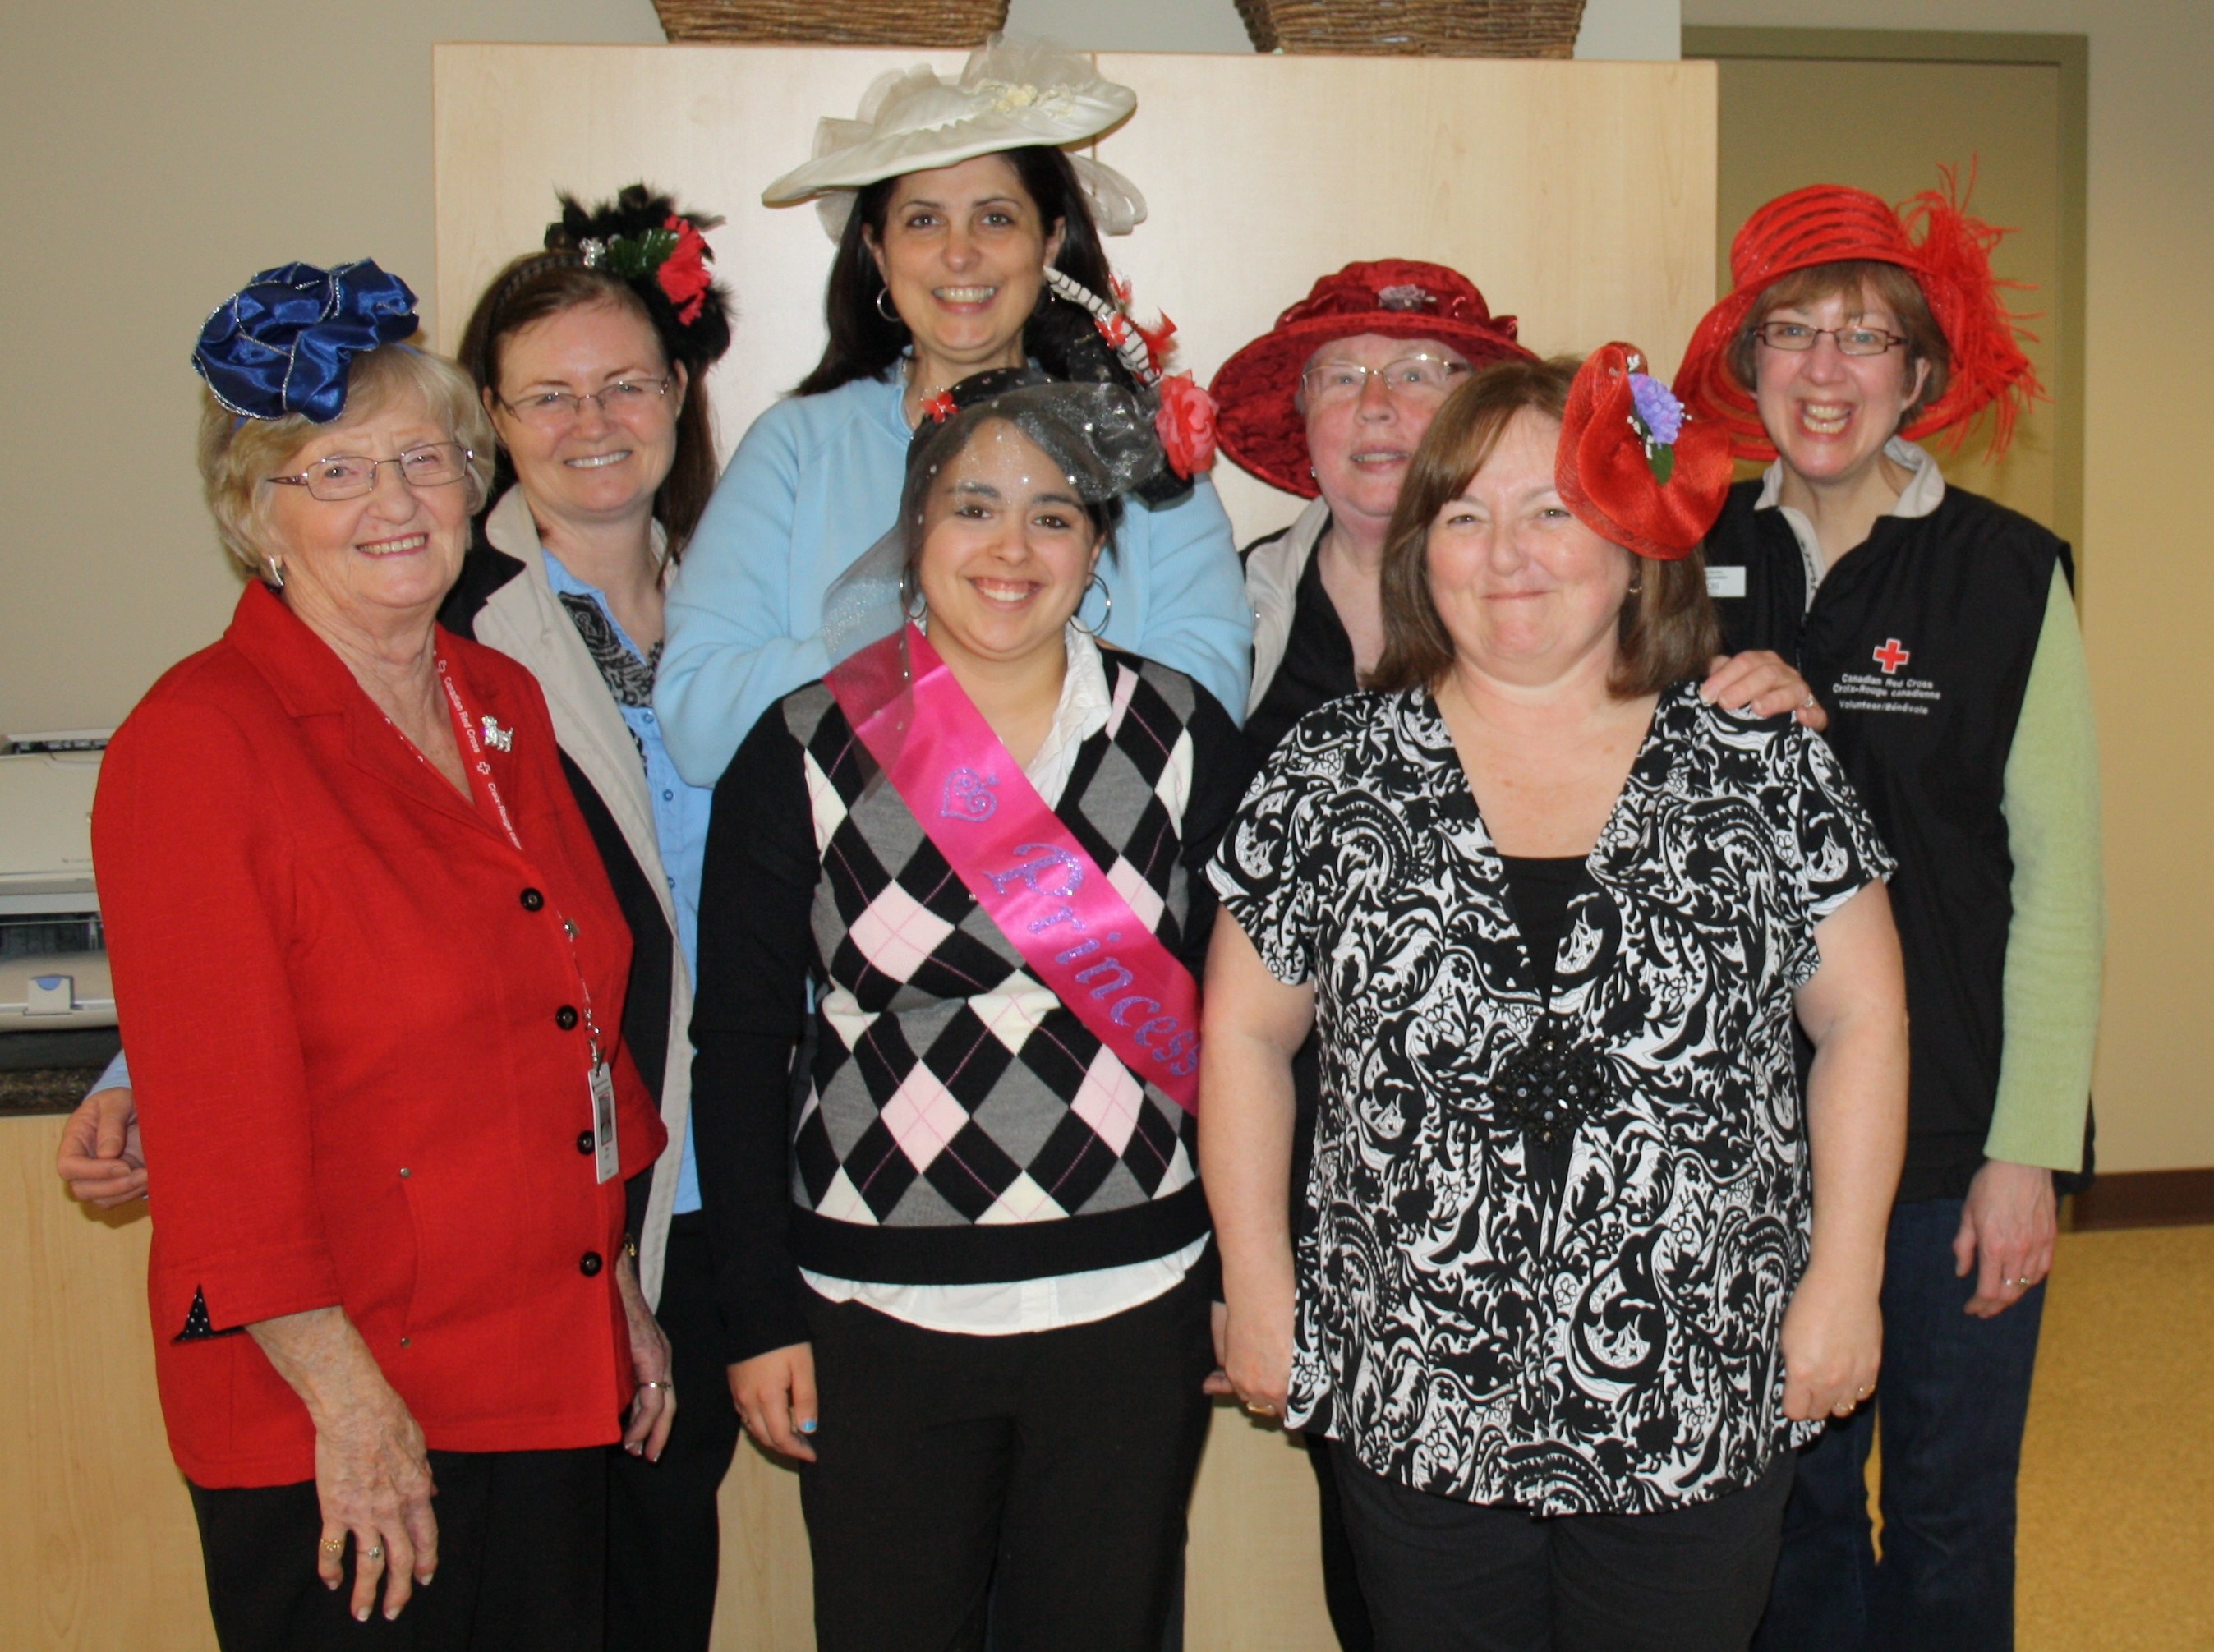 All manners of royal hats were on display at the Red Cross office in Kentville, Nova Scotia to celebrate the royal visit to Canada.